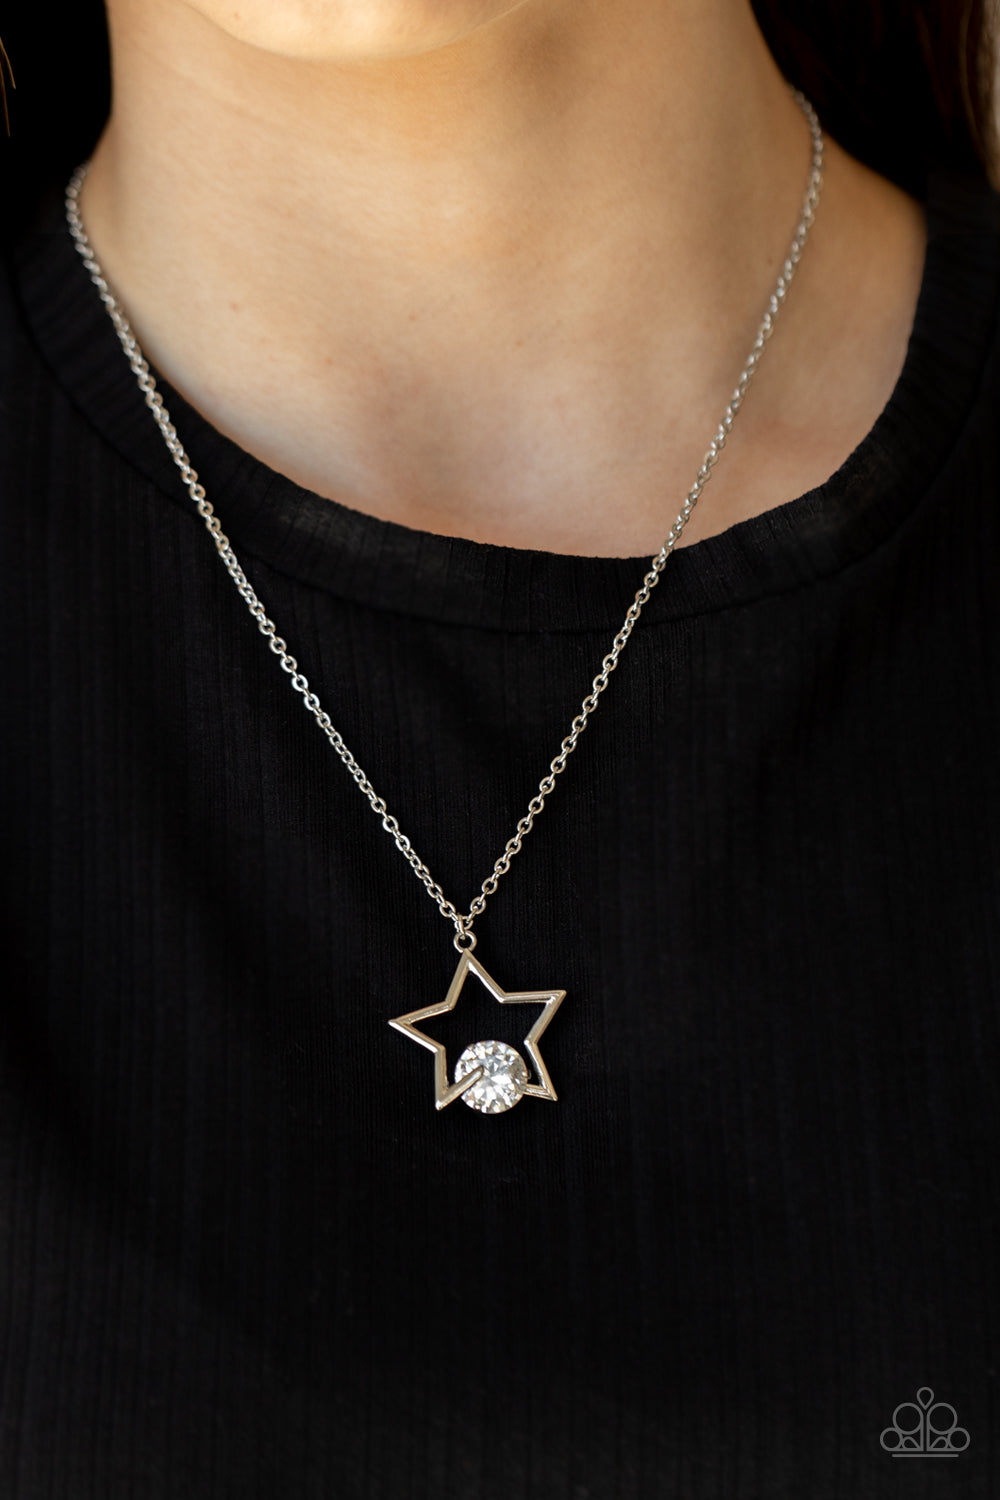 Starry Fireworks Necklace - White